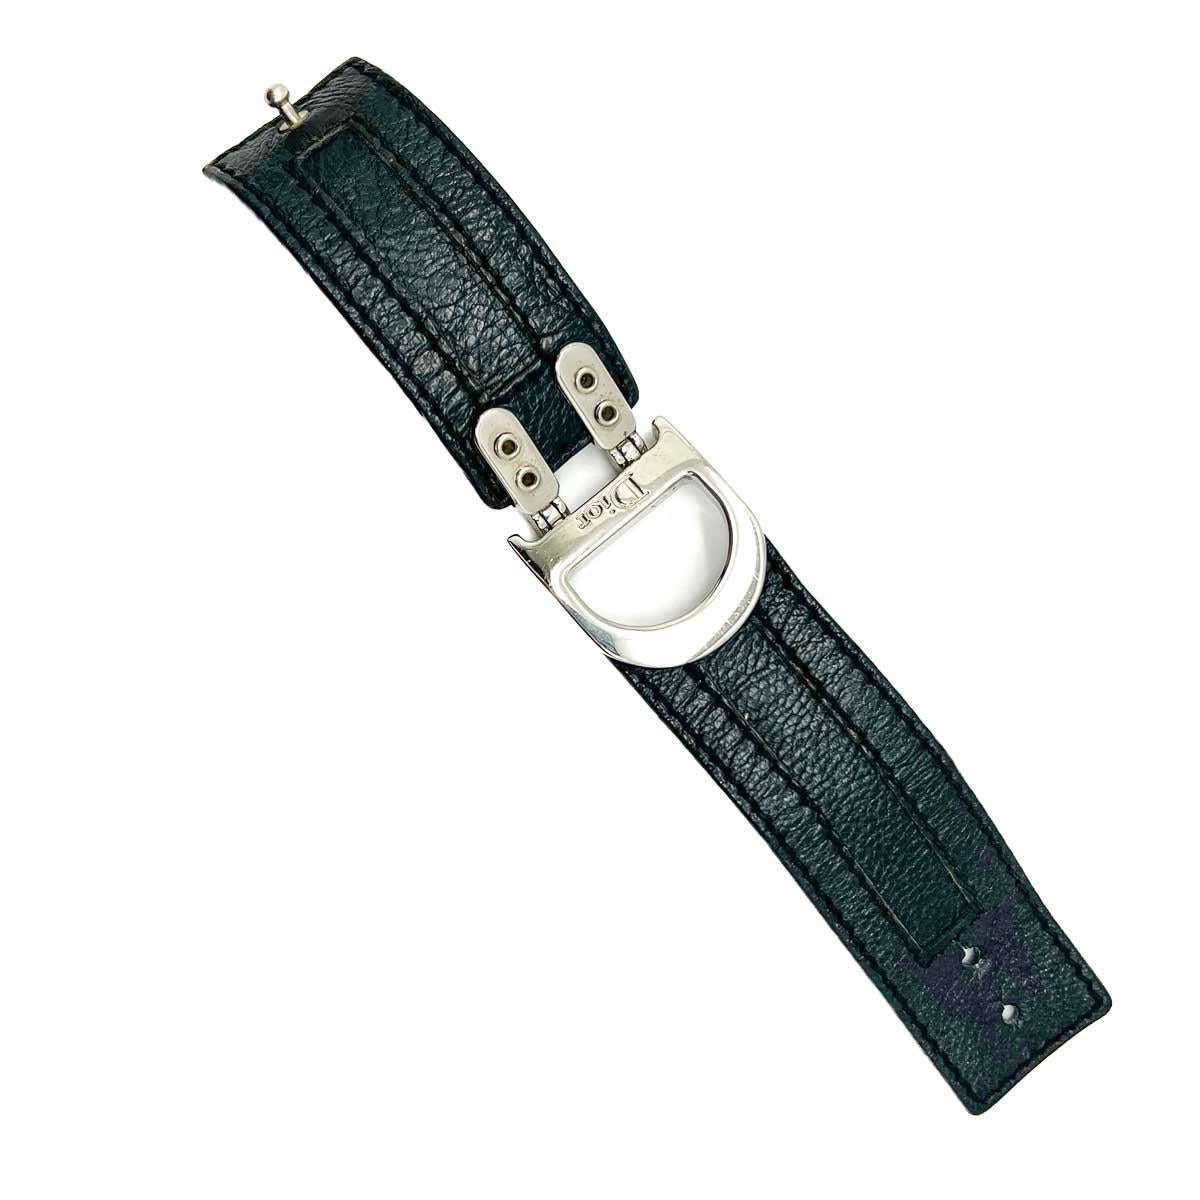 A Vintage Dior Leather Cuff. An imposing piece from the Galliano years with a strong Y2K vibe. Crafted in the softest black leather with a large iconic D motif at its heart, this is a style investment that will wow every time.
With archive pieces